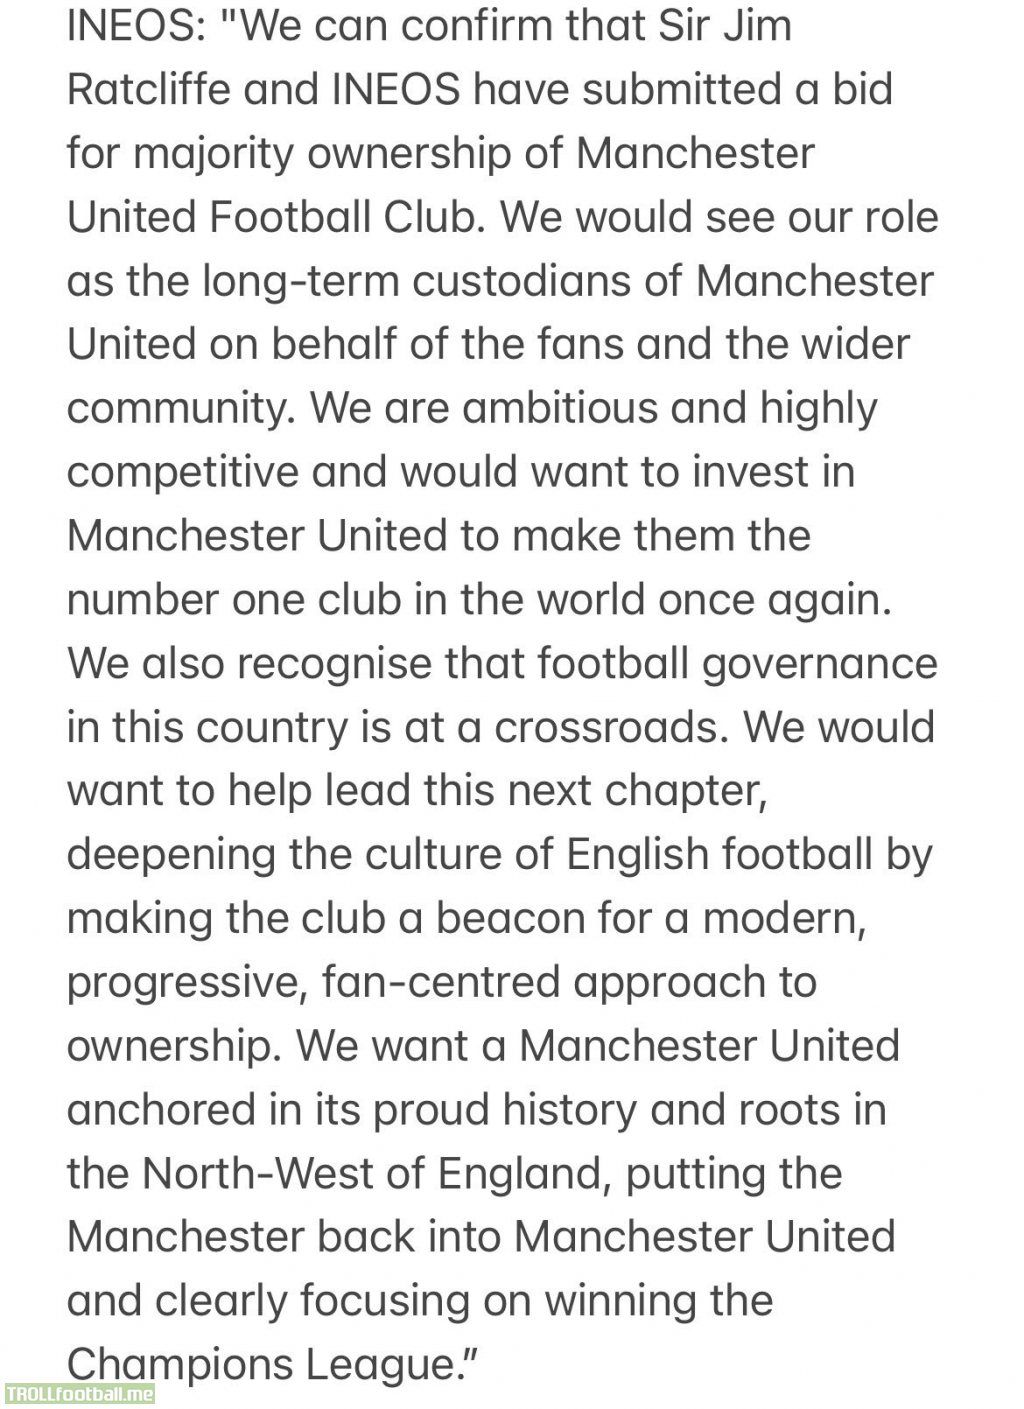 INEOS' statement regarding the potential purchase of Manchester United